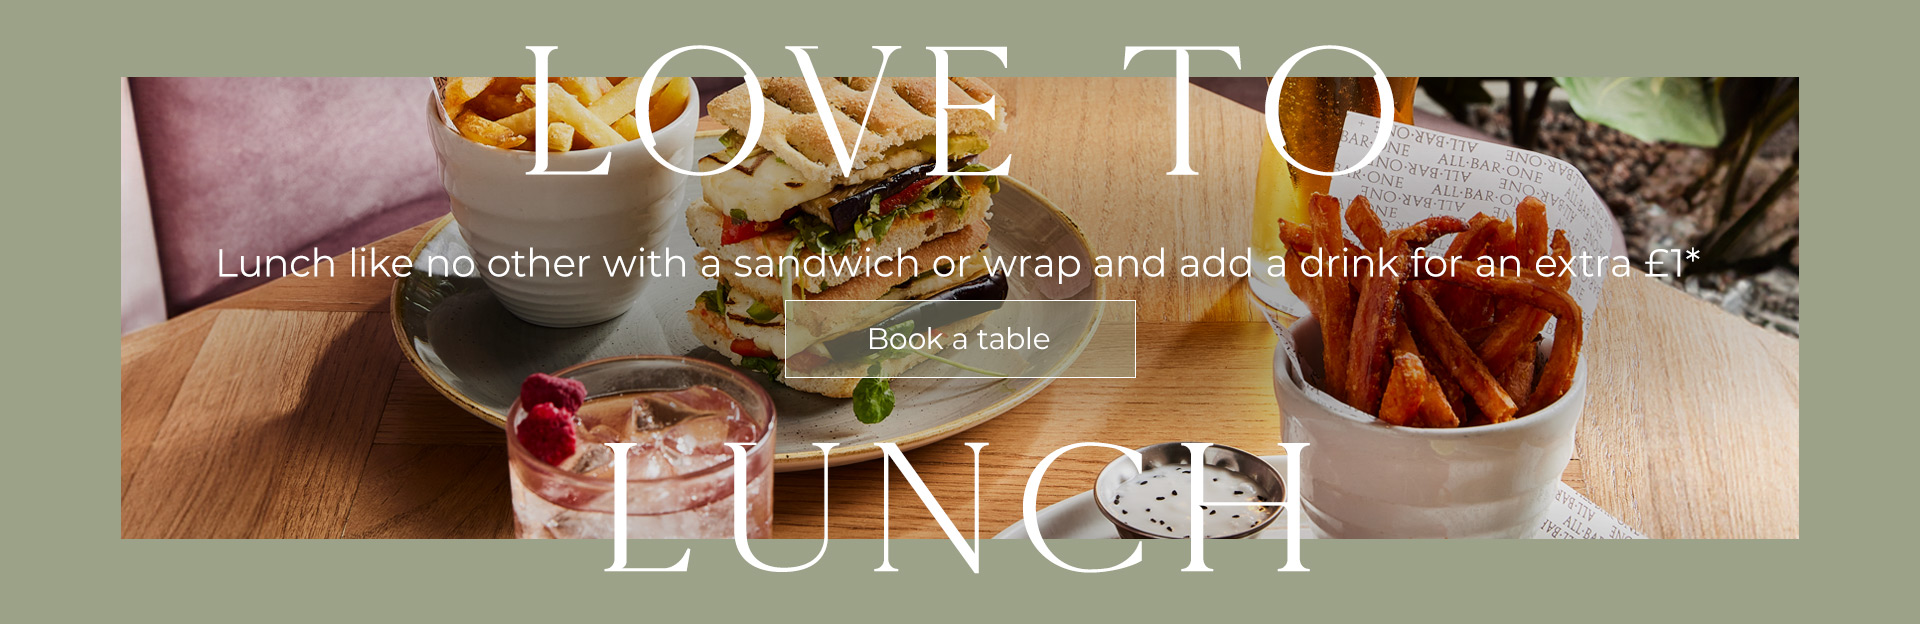 Lunch Offer at All Bar One Liverpool